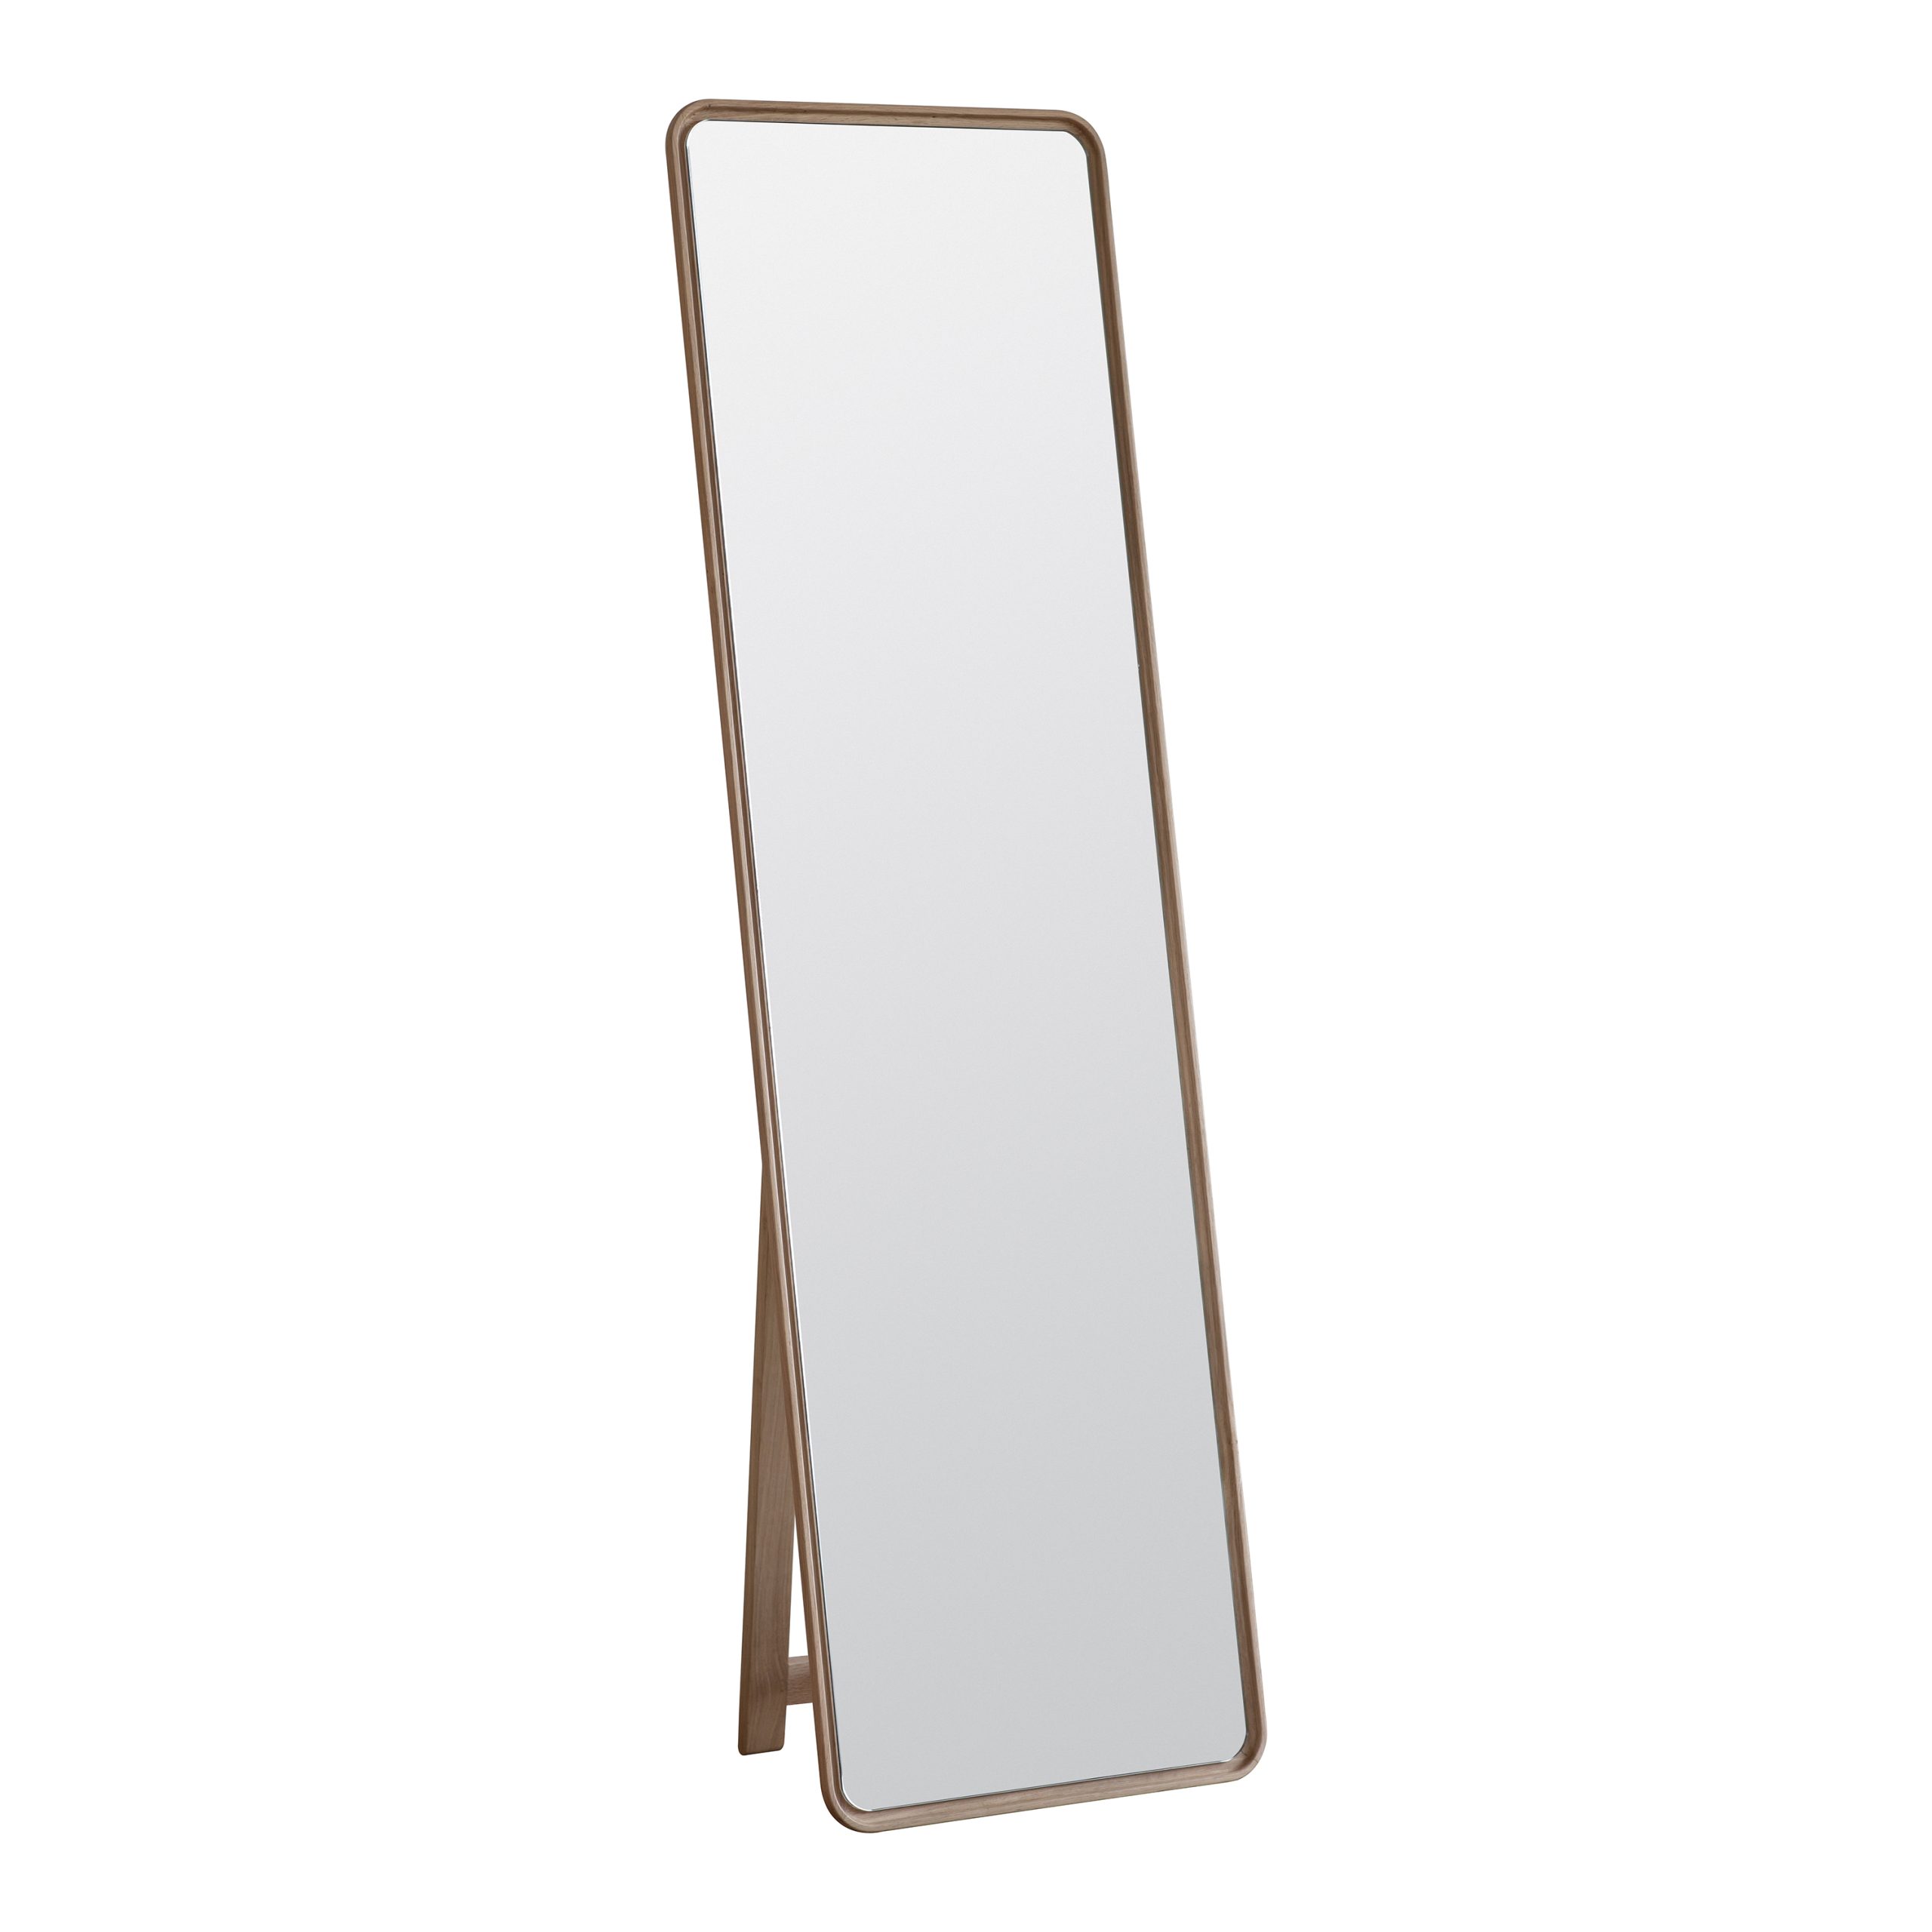 Gallery Direct Kingham Cheval Mirror